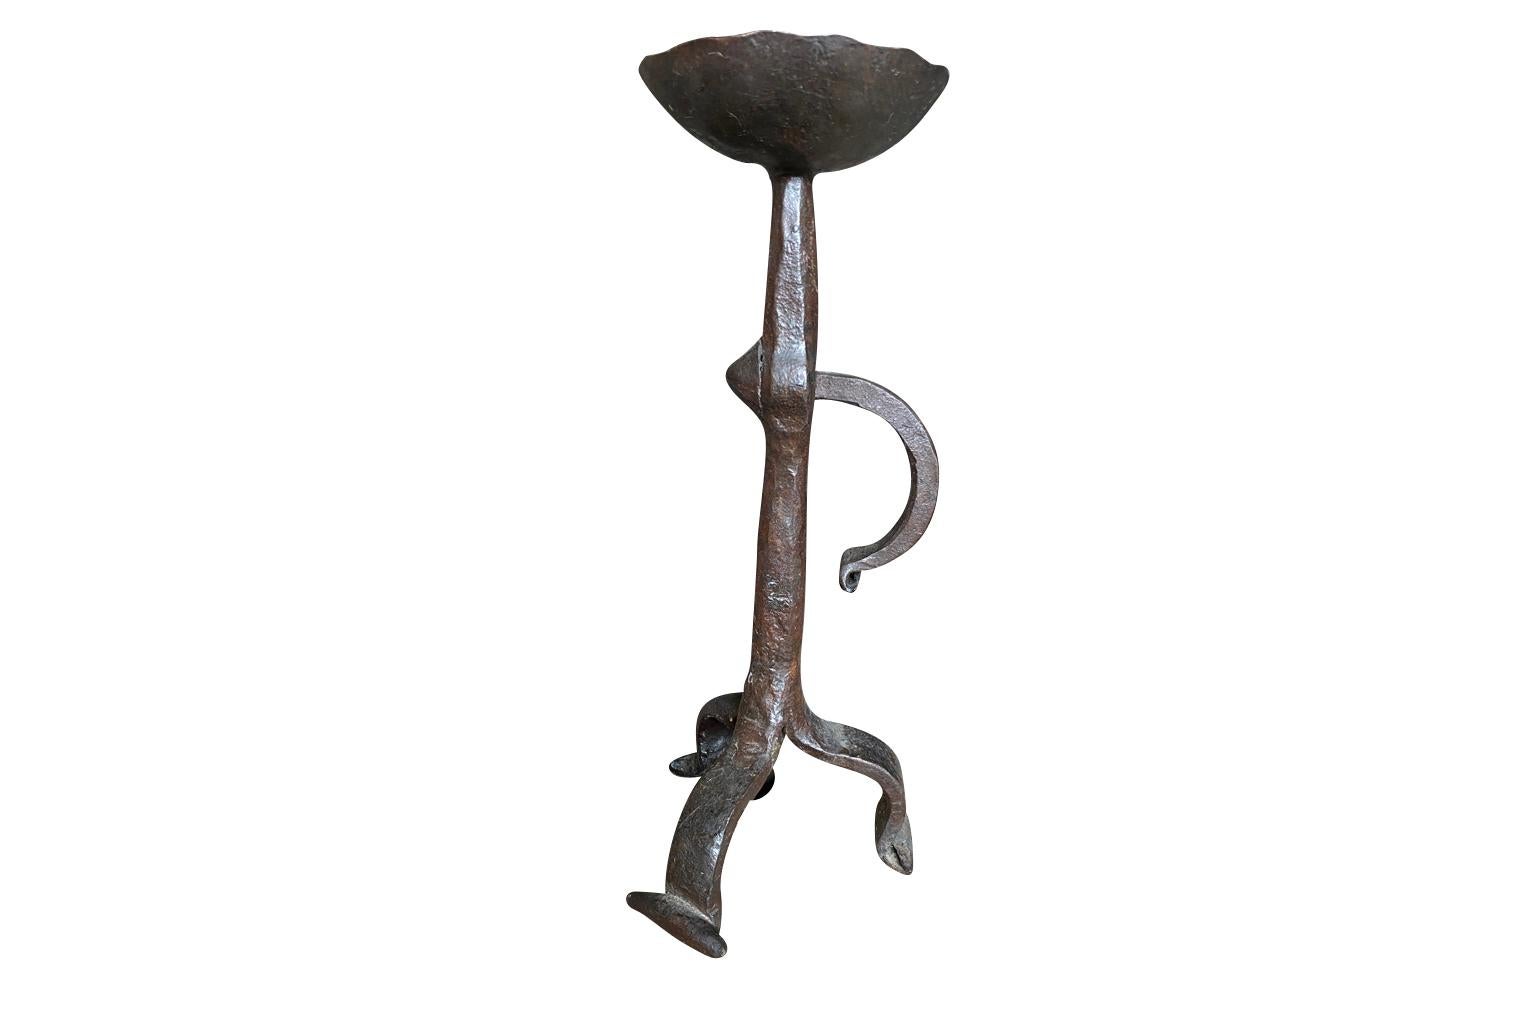 A very beautiful 17th century Bougeoire - Candlestick from the South of France.  Beautifully crafted from hand forged iron.  Terrific patina.  A perfect table top accessory.  